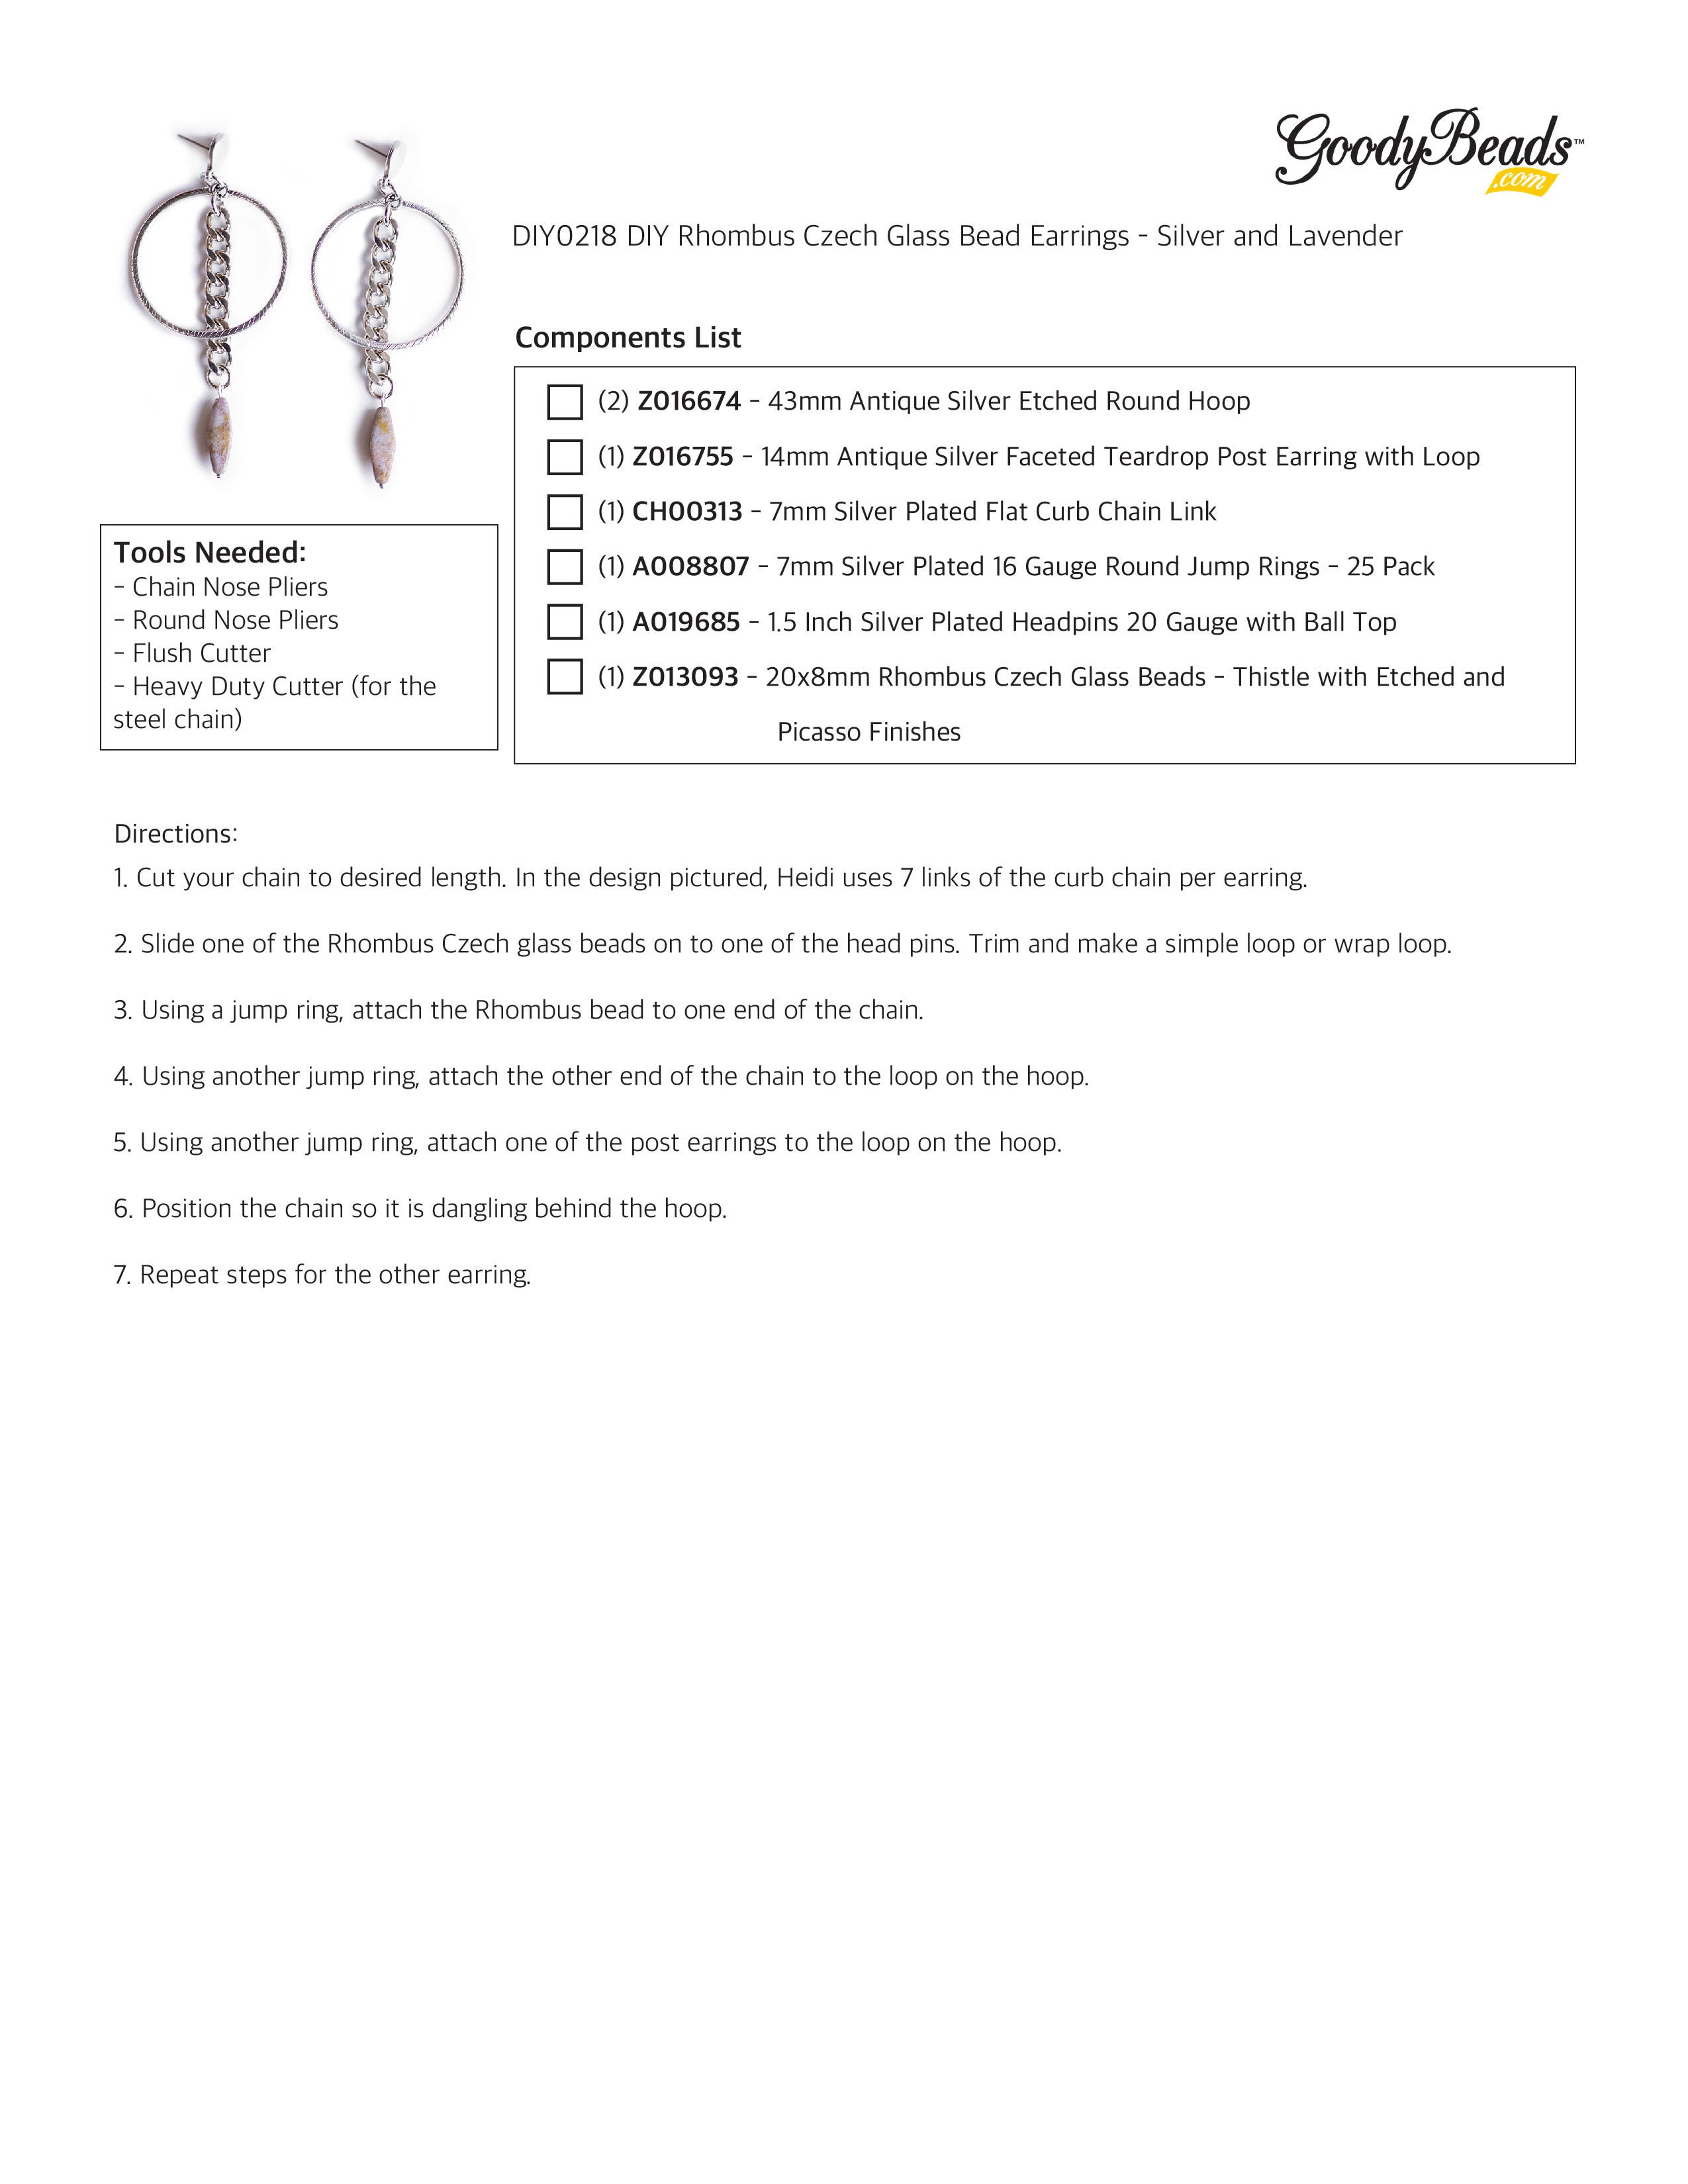 INSTRUCTIONS for DIY Rhombus Czech Glass Bead Earrings – Silver and Lavender